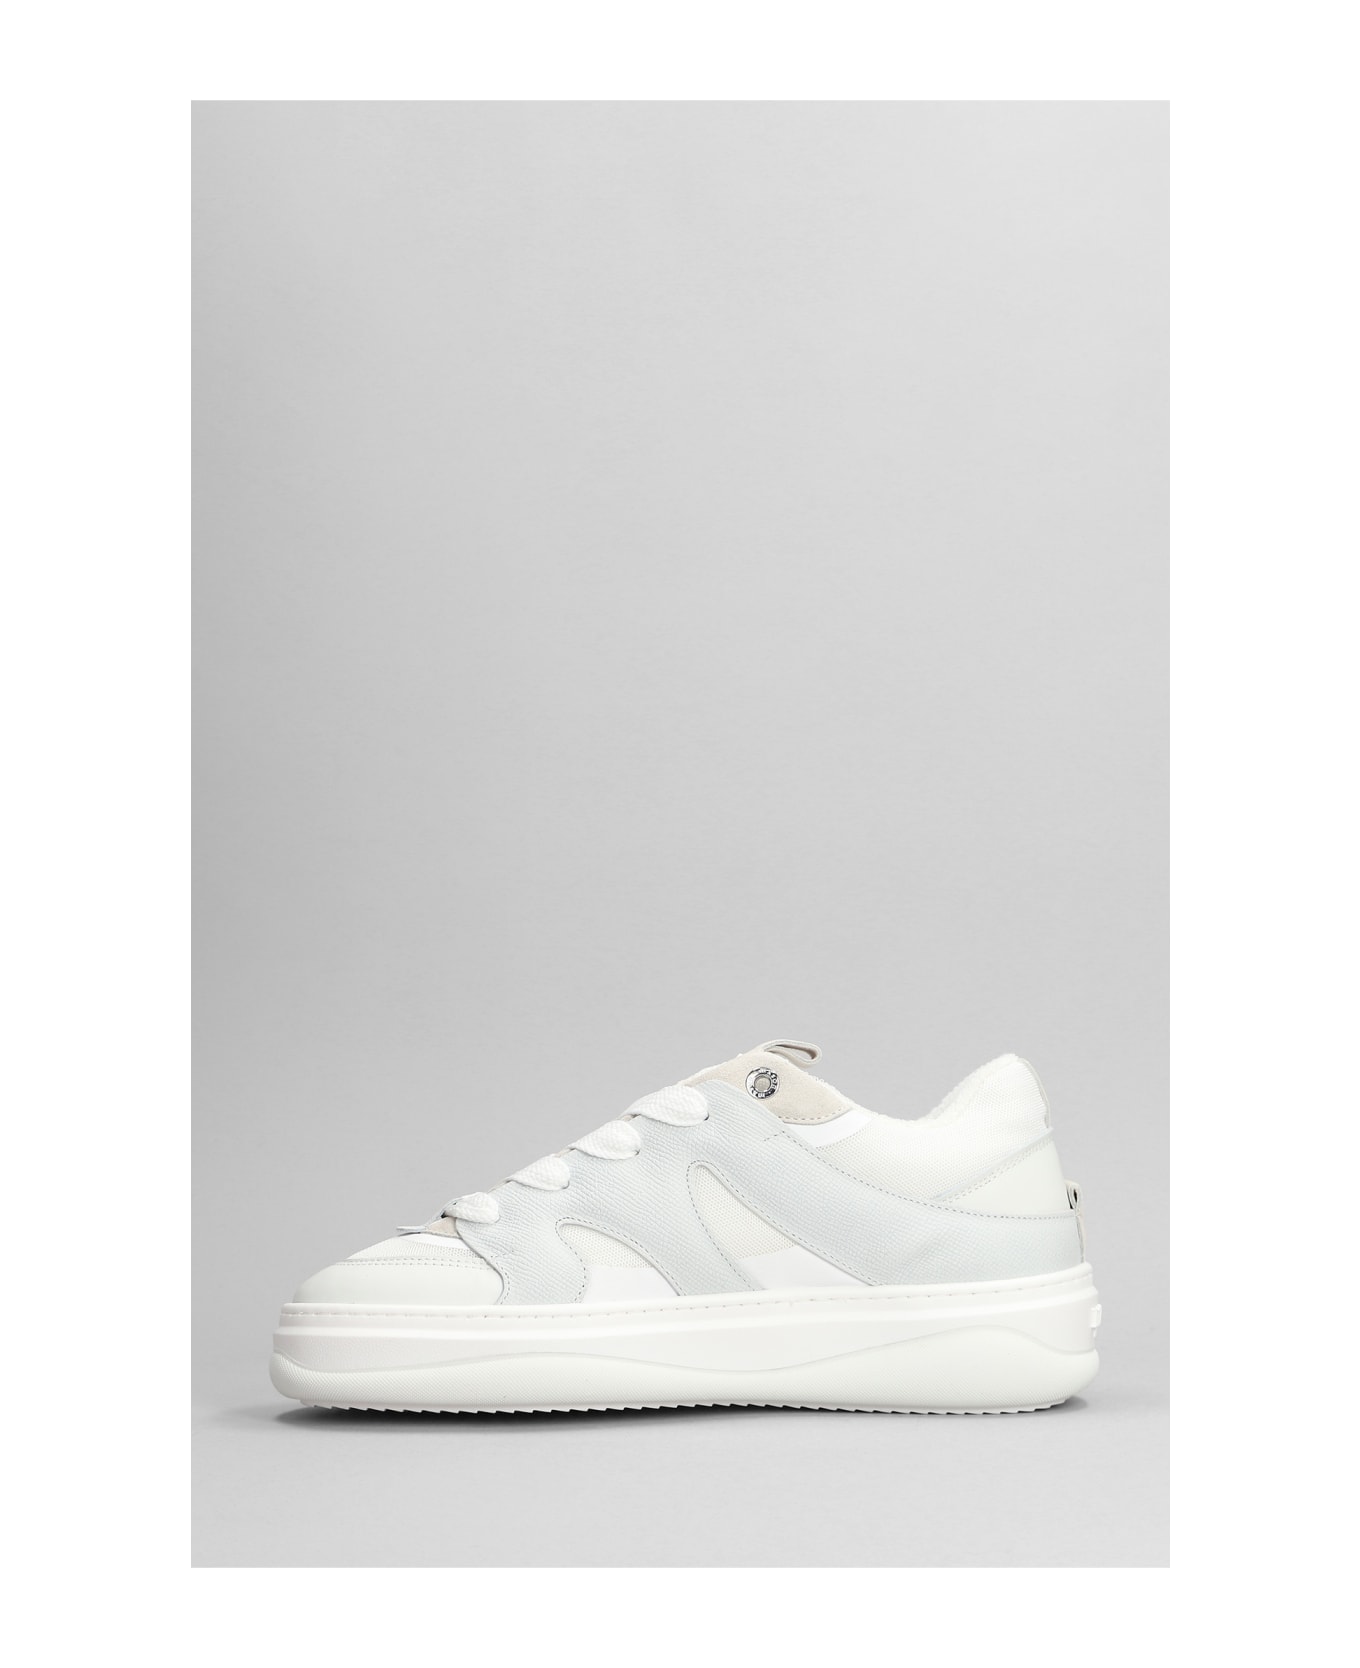 Mason Garments Venice Sneakers In White Suede And Fabric - white スニーカー